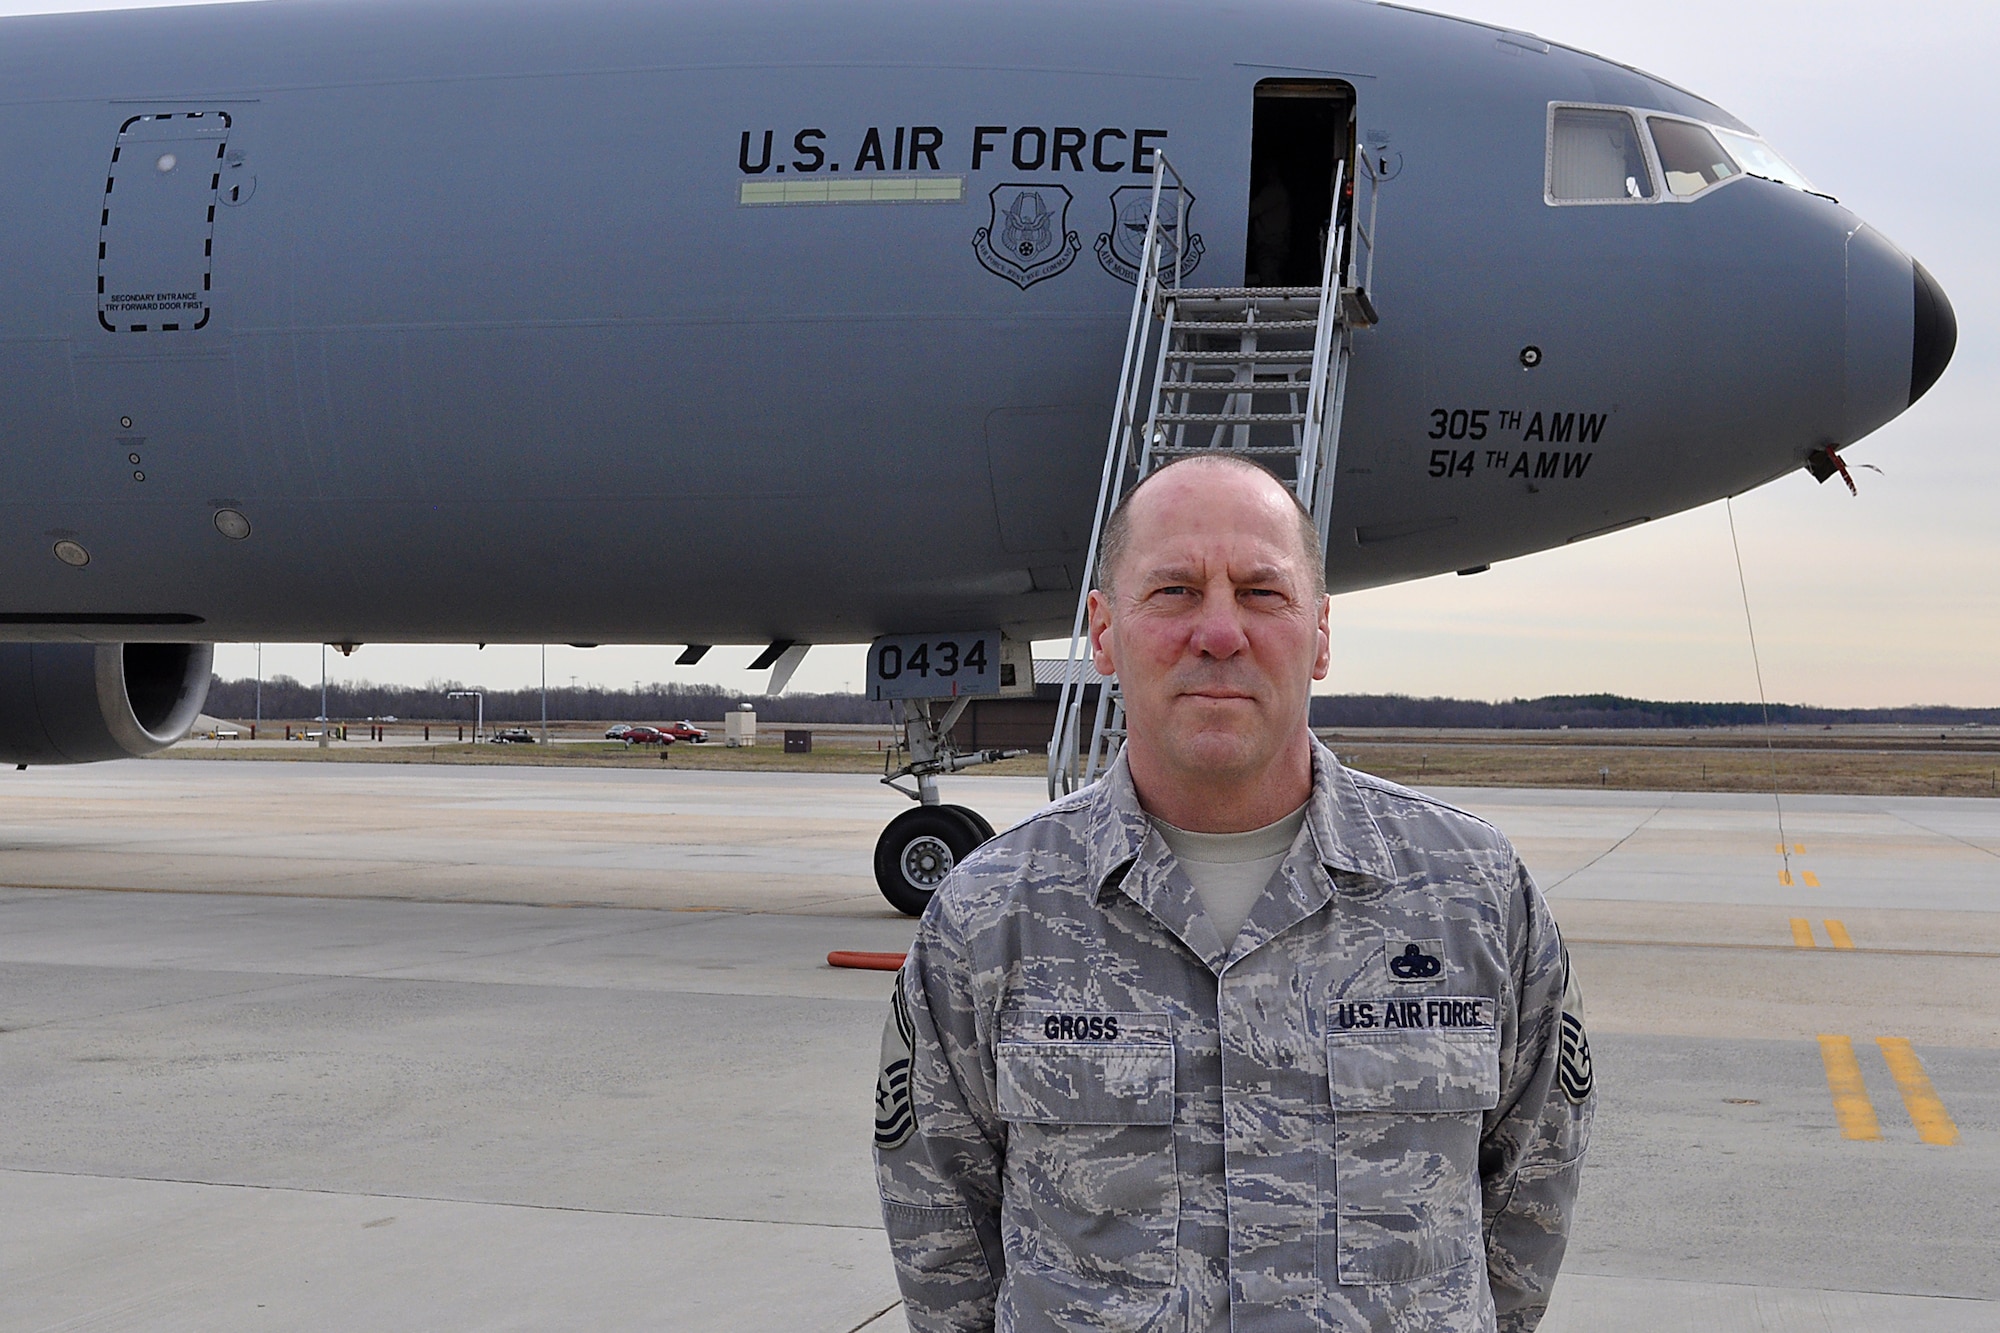 JOINT BASE MCGUIRE-DIX-LAKEHURST, N.J. --Technical Sgt. Bill Gross, a KC-10 Extender crew chief, stands on the flightline here March 8, 2011. Sergeant Gross was the long-time crew chief assigned to the Air Force's first KC-10 and has been stationed with the aircraft for nearly his entire career. As the KC-10 celebrates its 30th year of Air Force service on March 17, 2011, Sergeant Gross can claim that he has been there every step of the way. (U.S. Air Force photo)